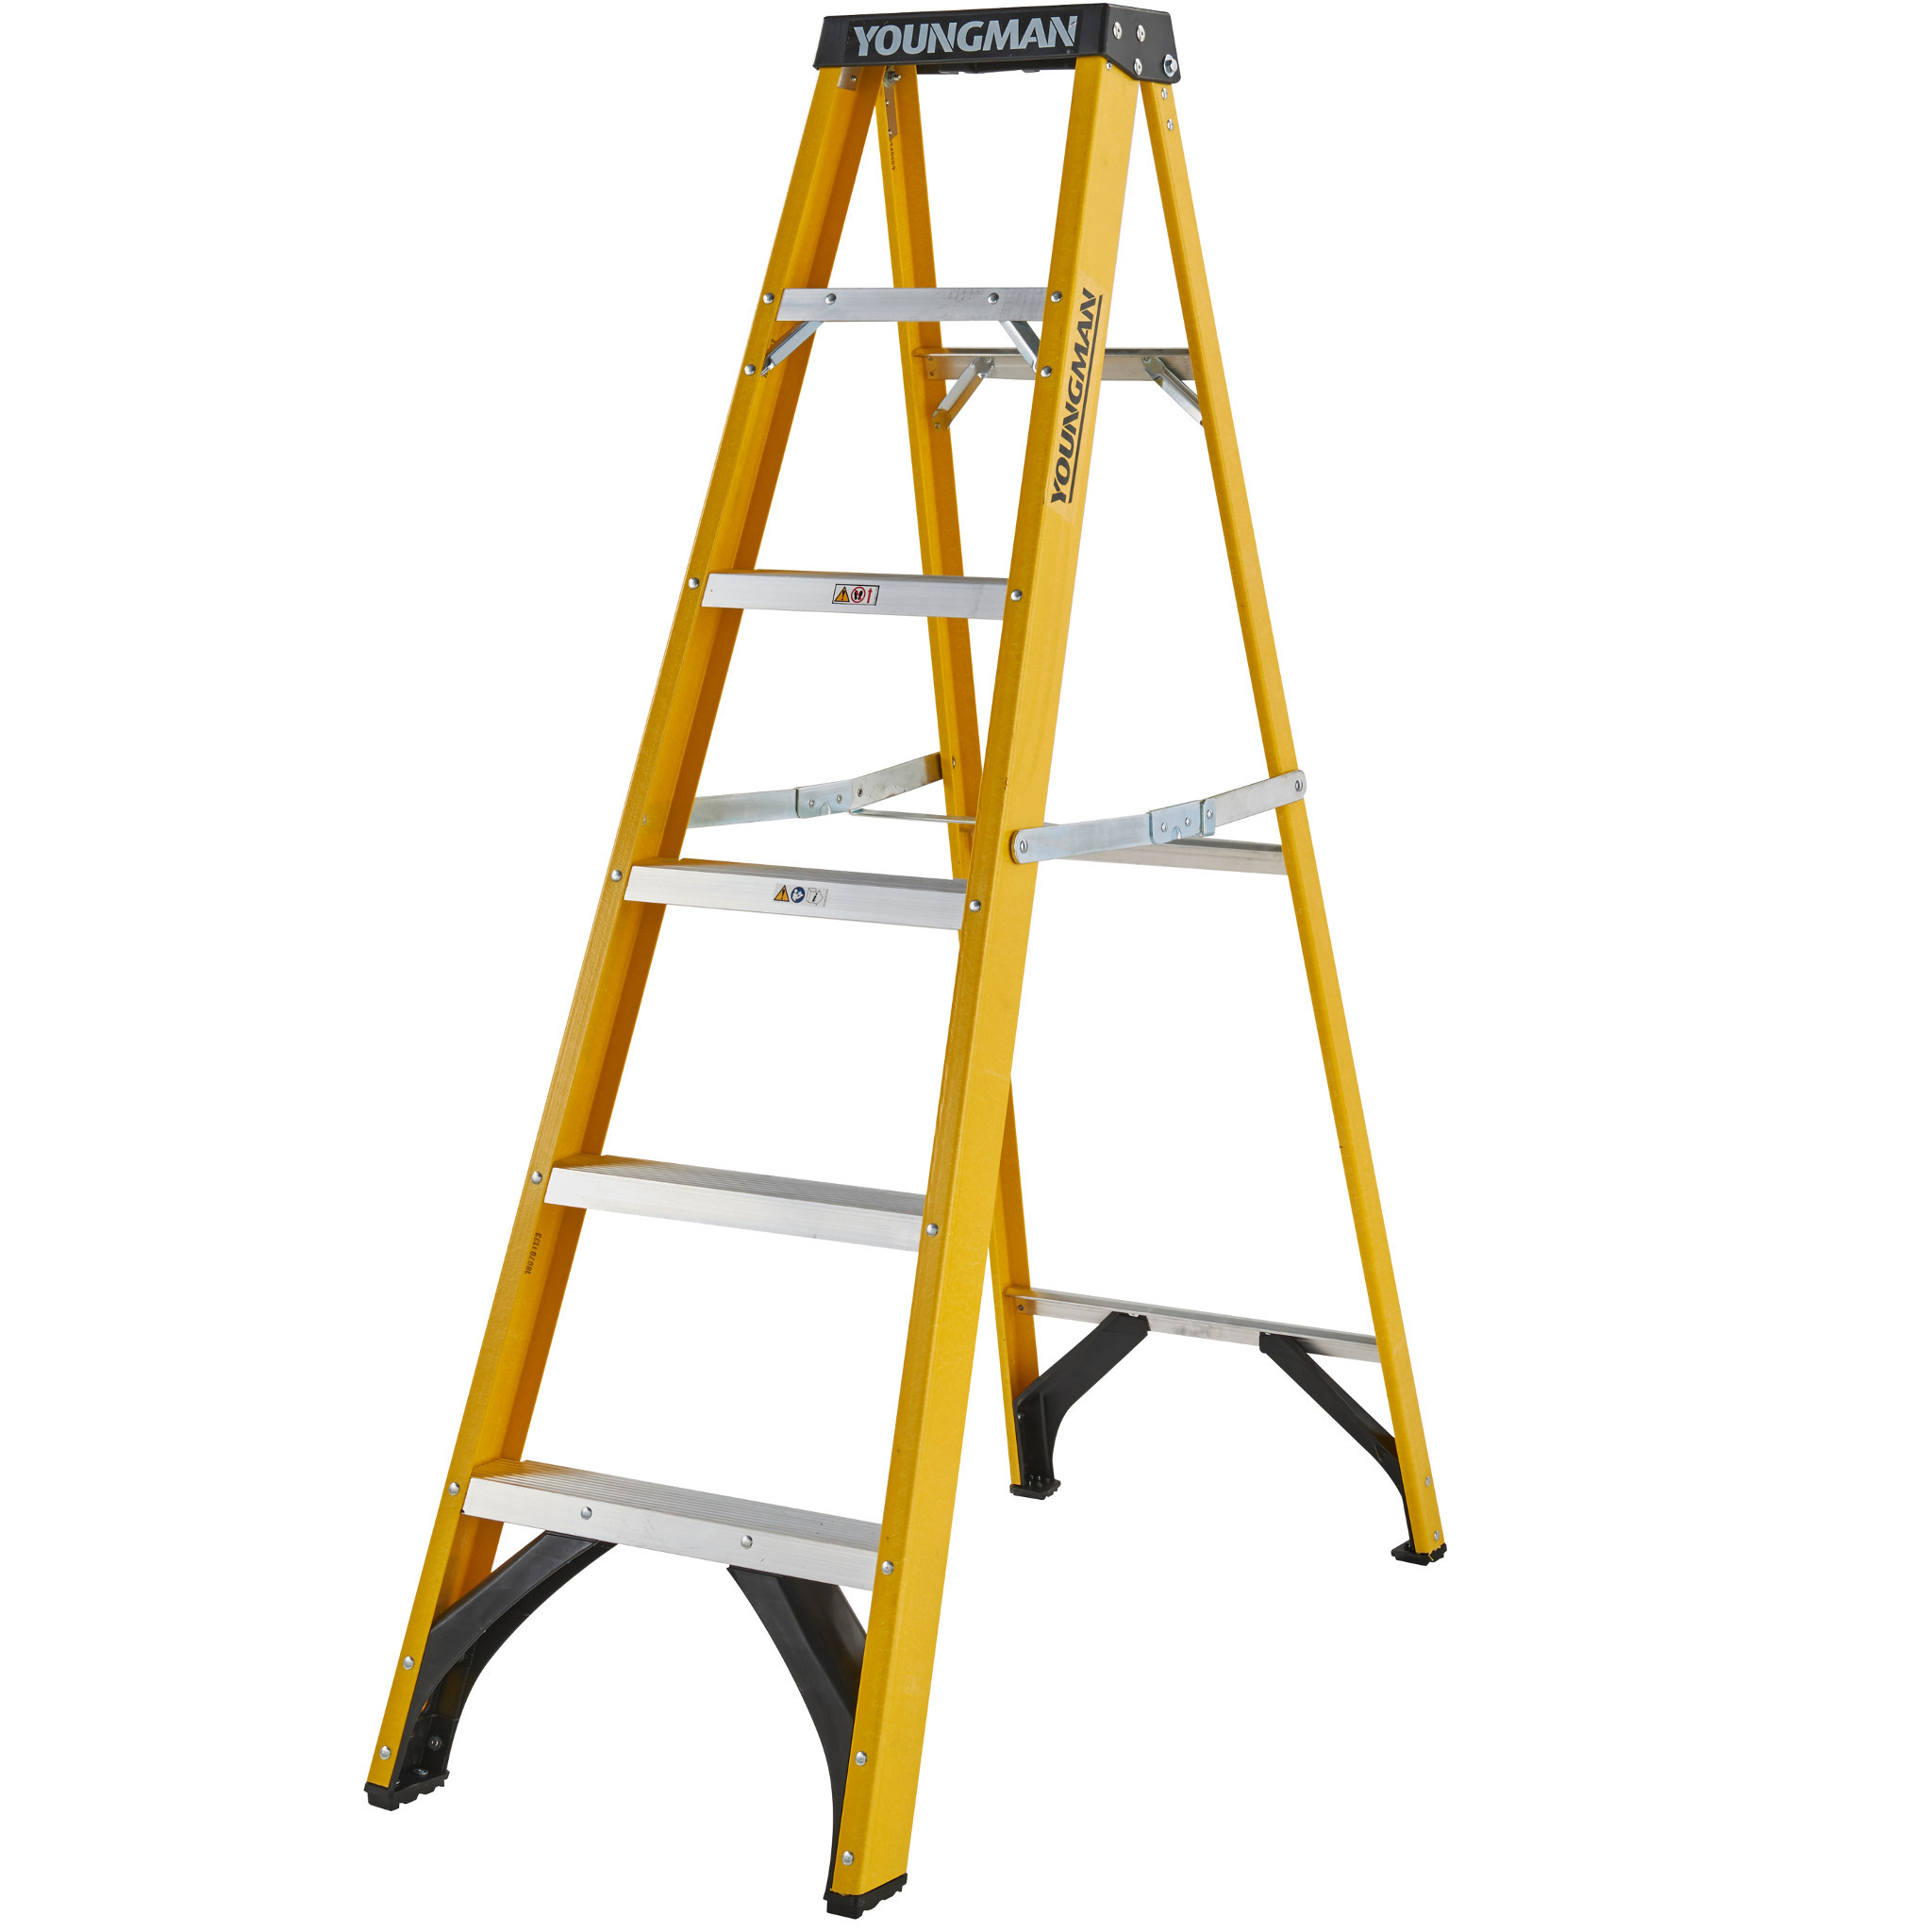 Youngman two youngman ladders 3 and 5 tread 